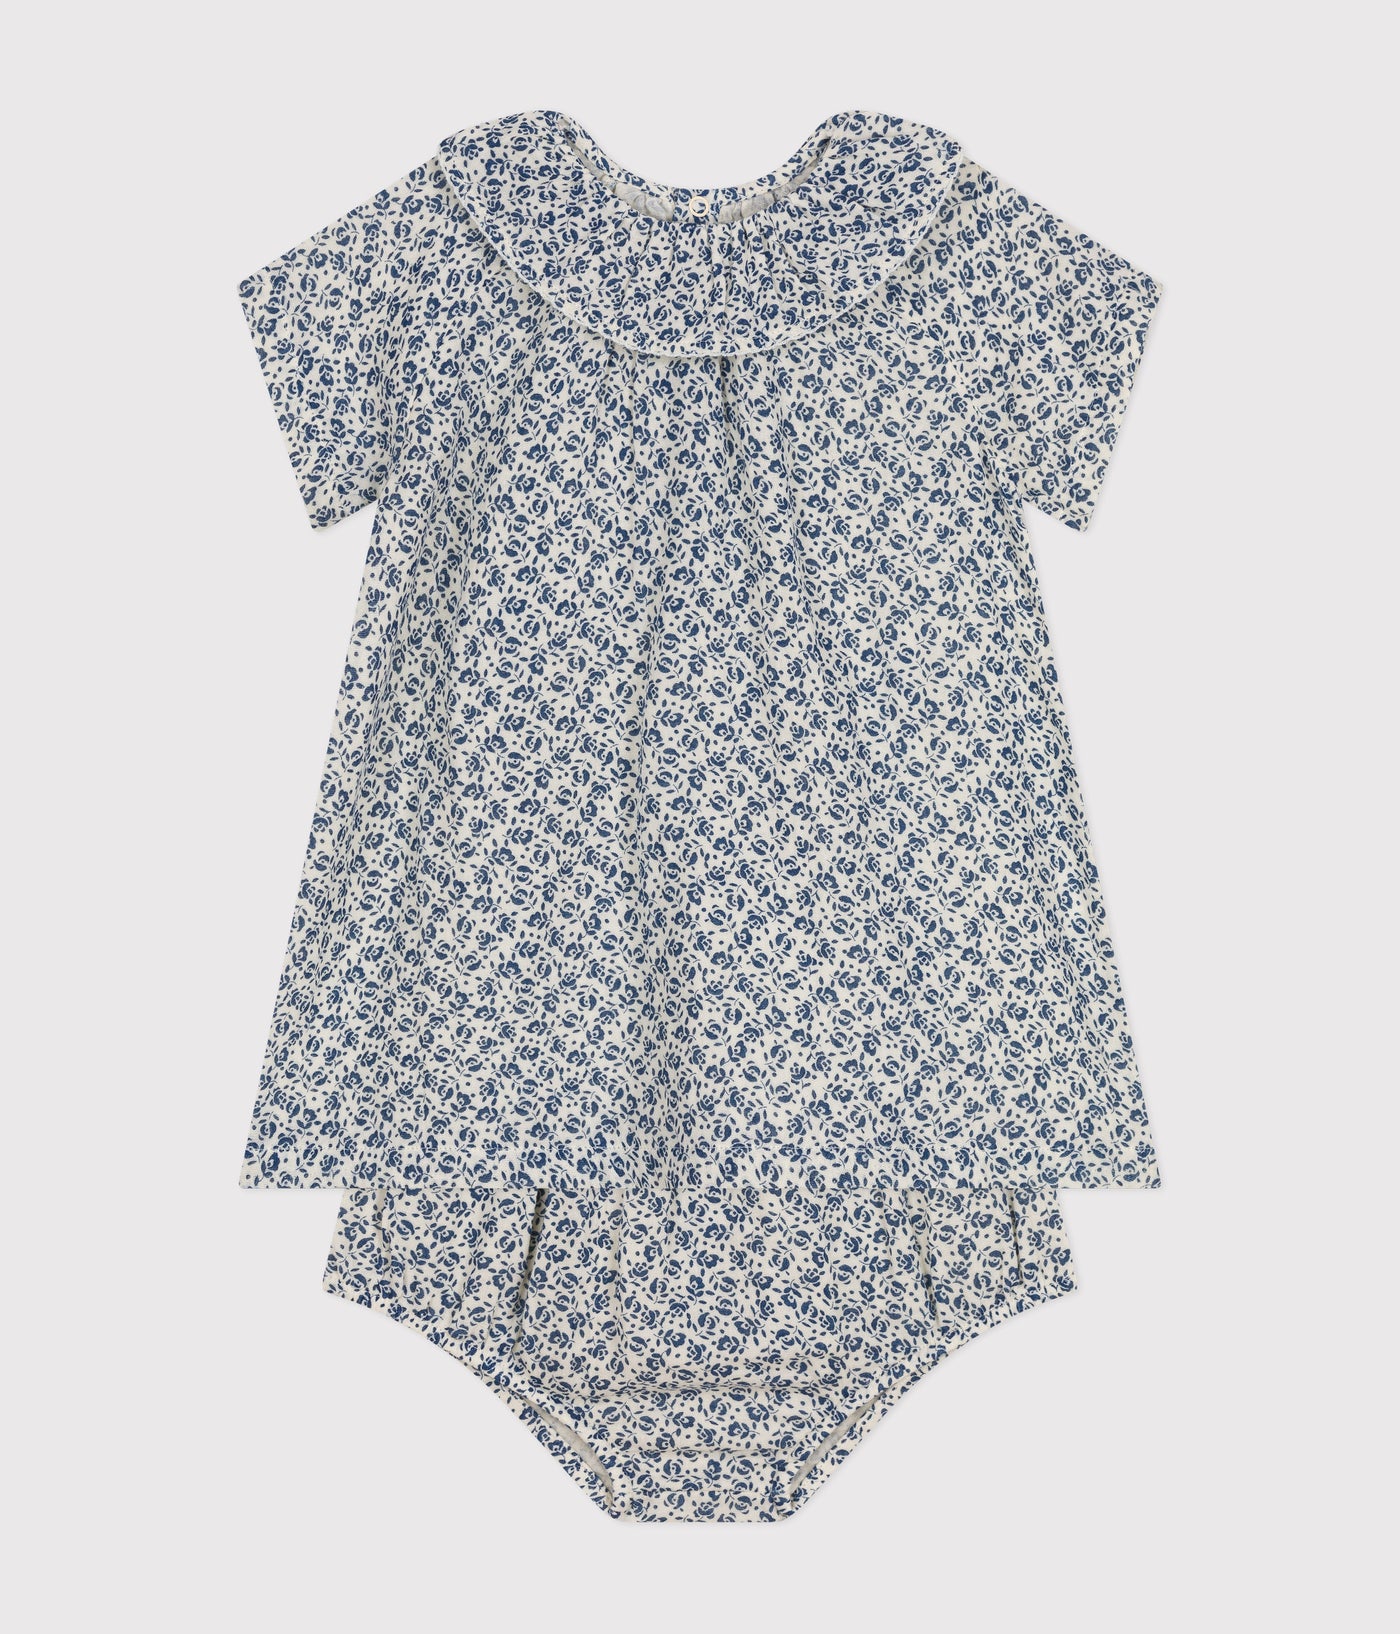 BABIES' COTTON GAUZE SHORT-SLEEVED DRESS AND BLOOMERS